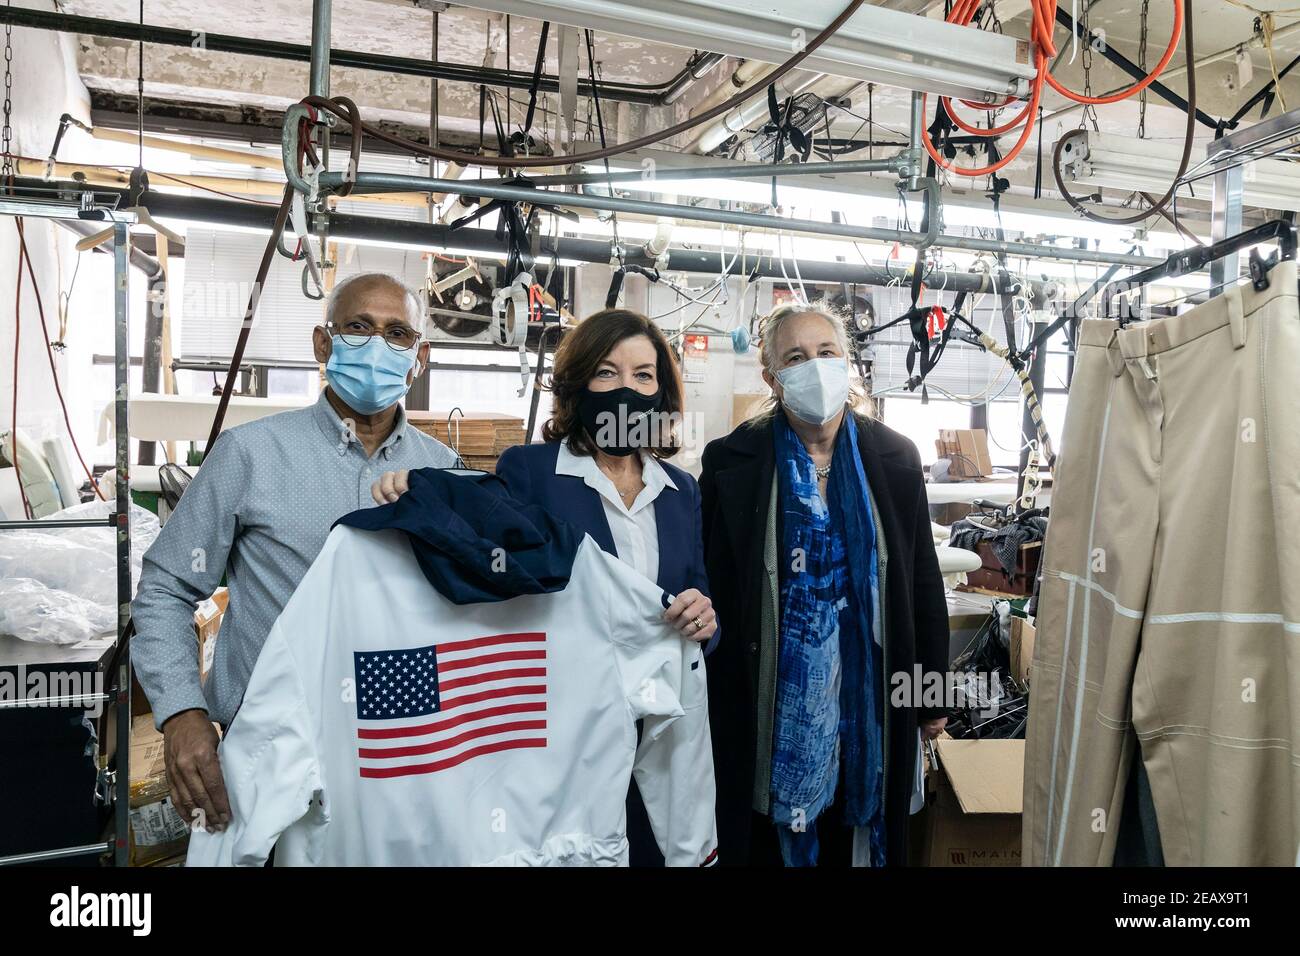 New York, United States. 10th Feb, 2021. LG Kathy Hochul visits Four Seasons Fashion as part of women-owned nonprofit Garment District for Gowns on 39th street of Manhattan in New York on February 10, 2021. LG was touring Four Season Fashion company owned by Tony Singh (L) and Manhattan borough President Gail Brewer (R). (Photo by Lev Radin/Sipa USA) Credit: Sipa USA/Alamy Live News Stock Photo